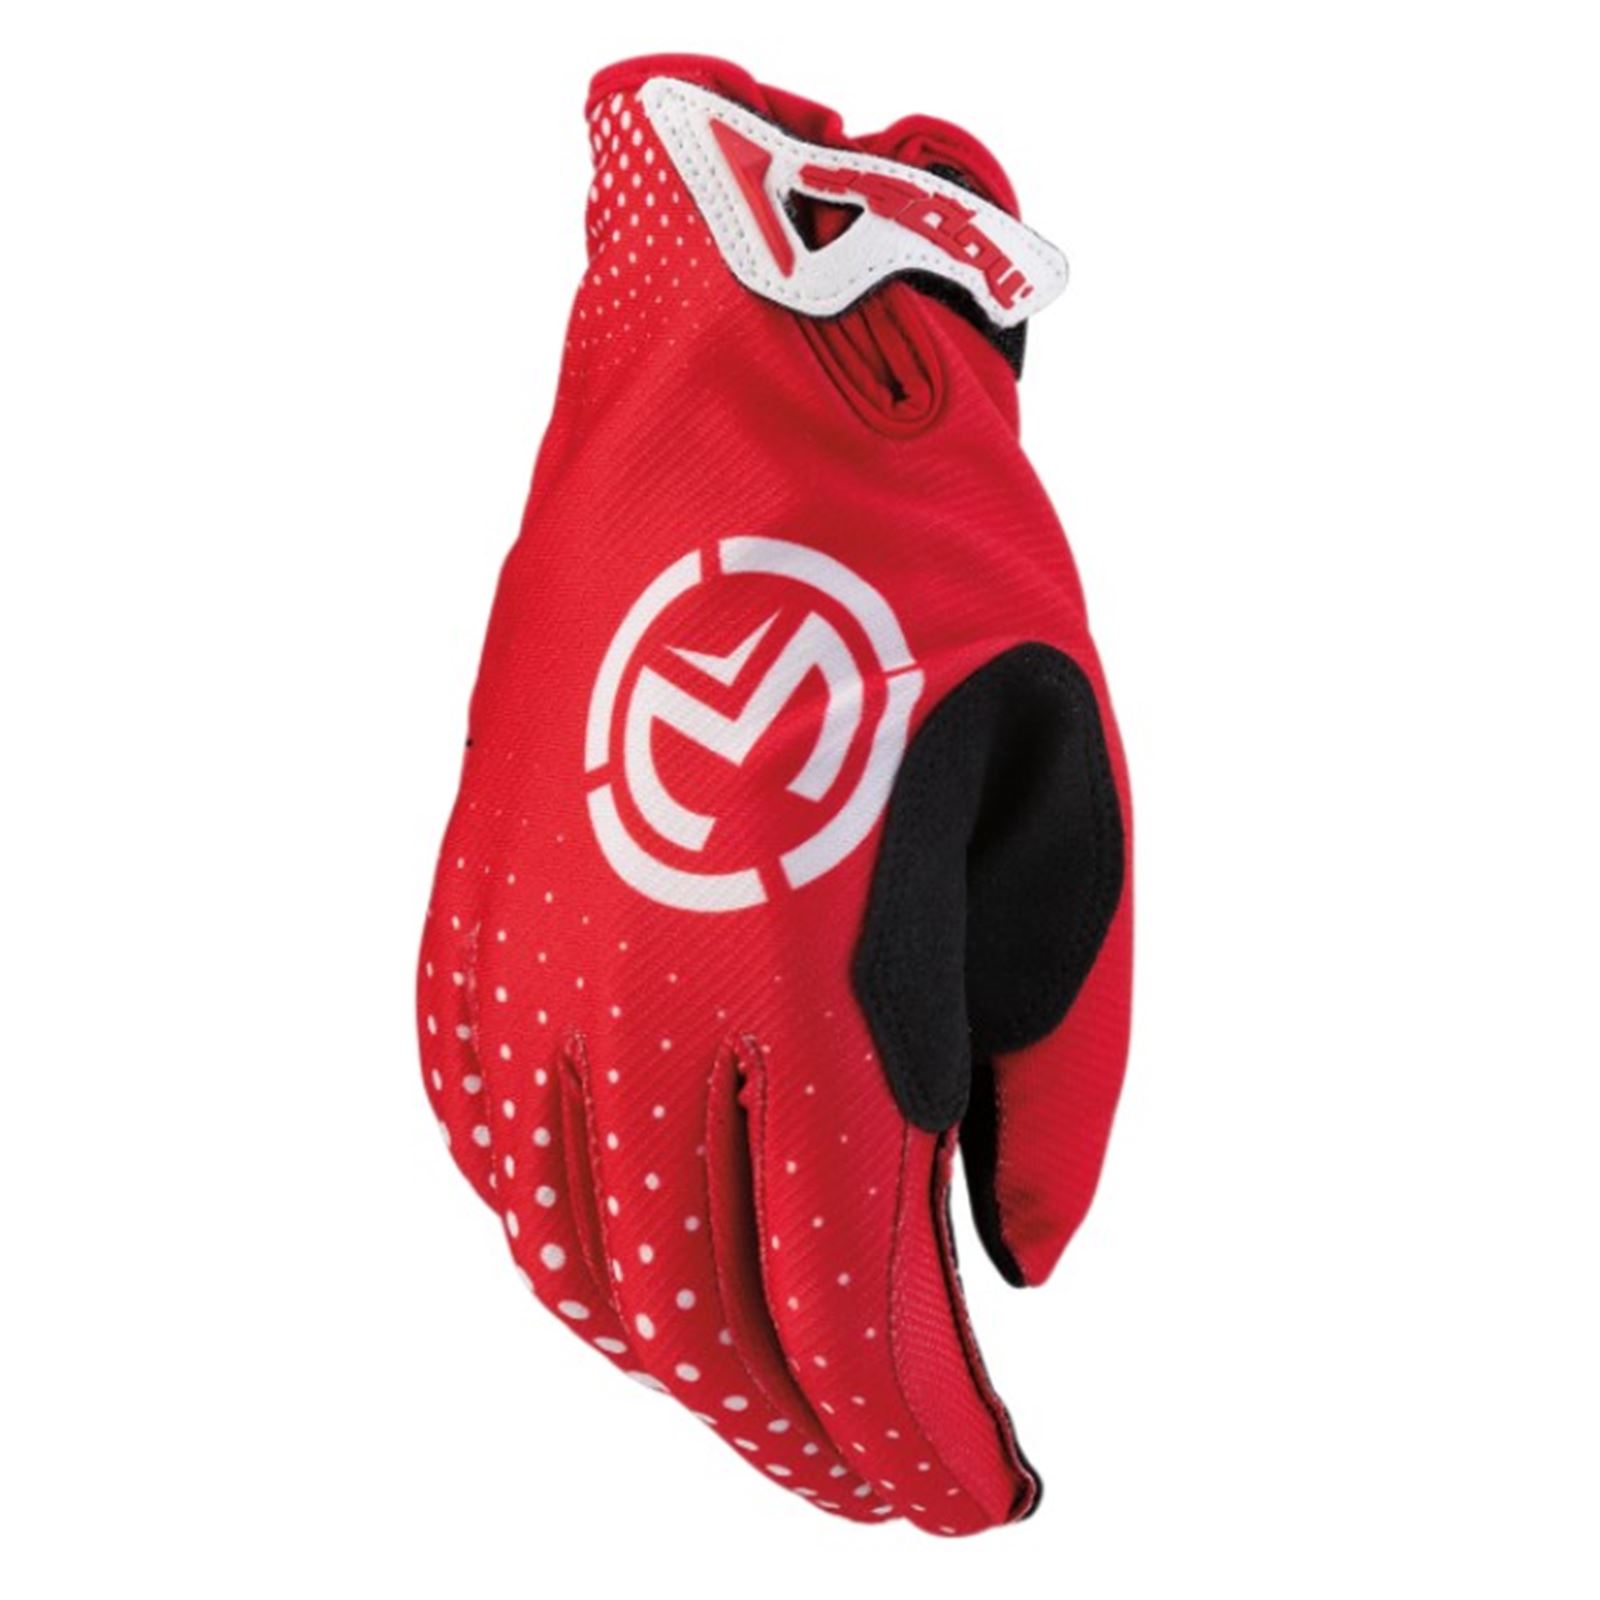 Moose Racing Youth SX1 Gloves - Red - Medium